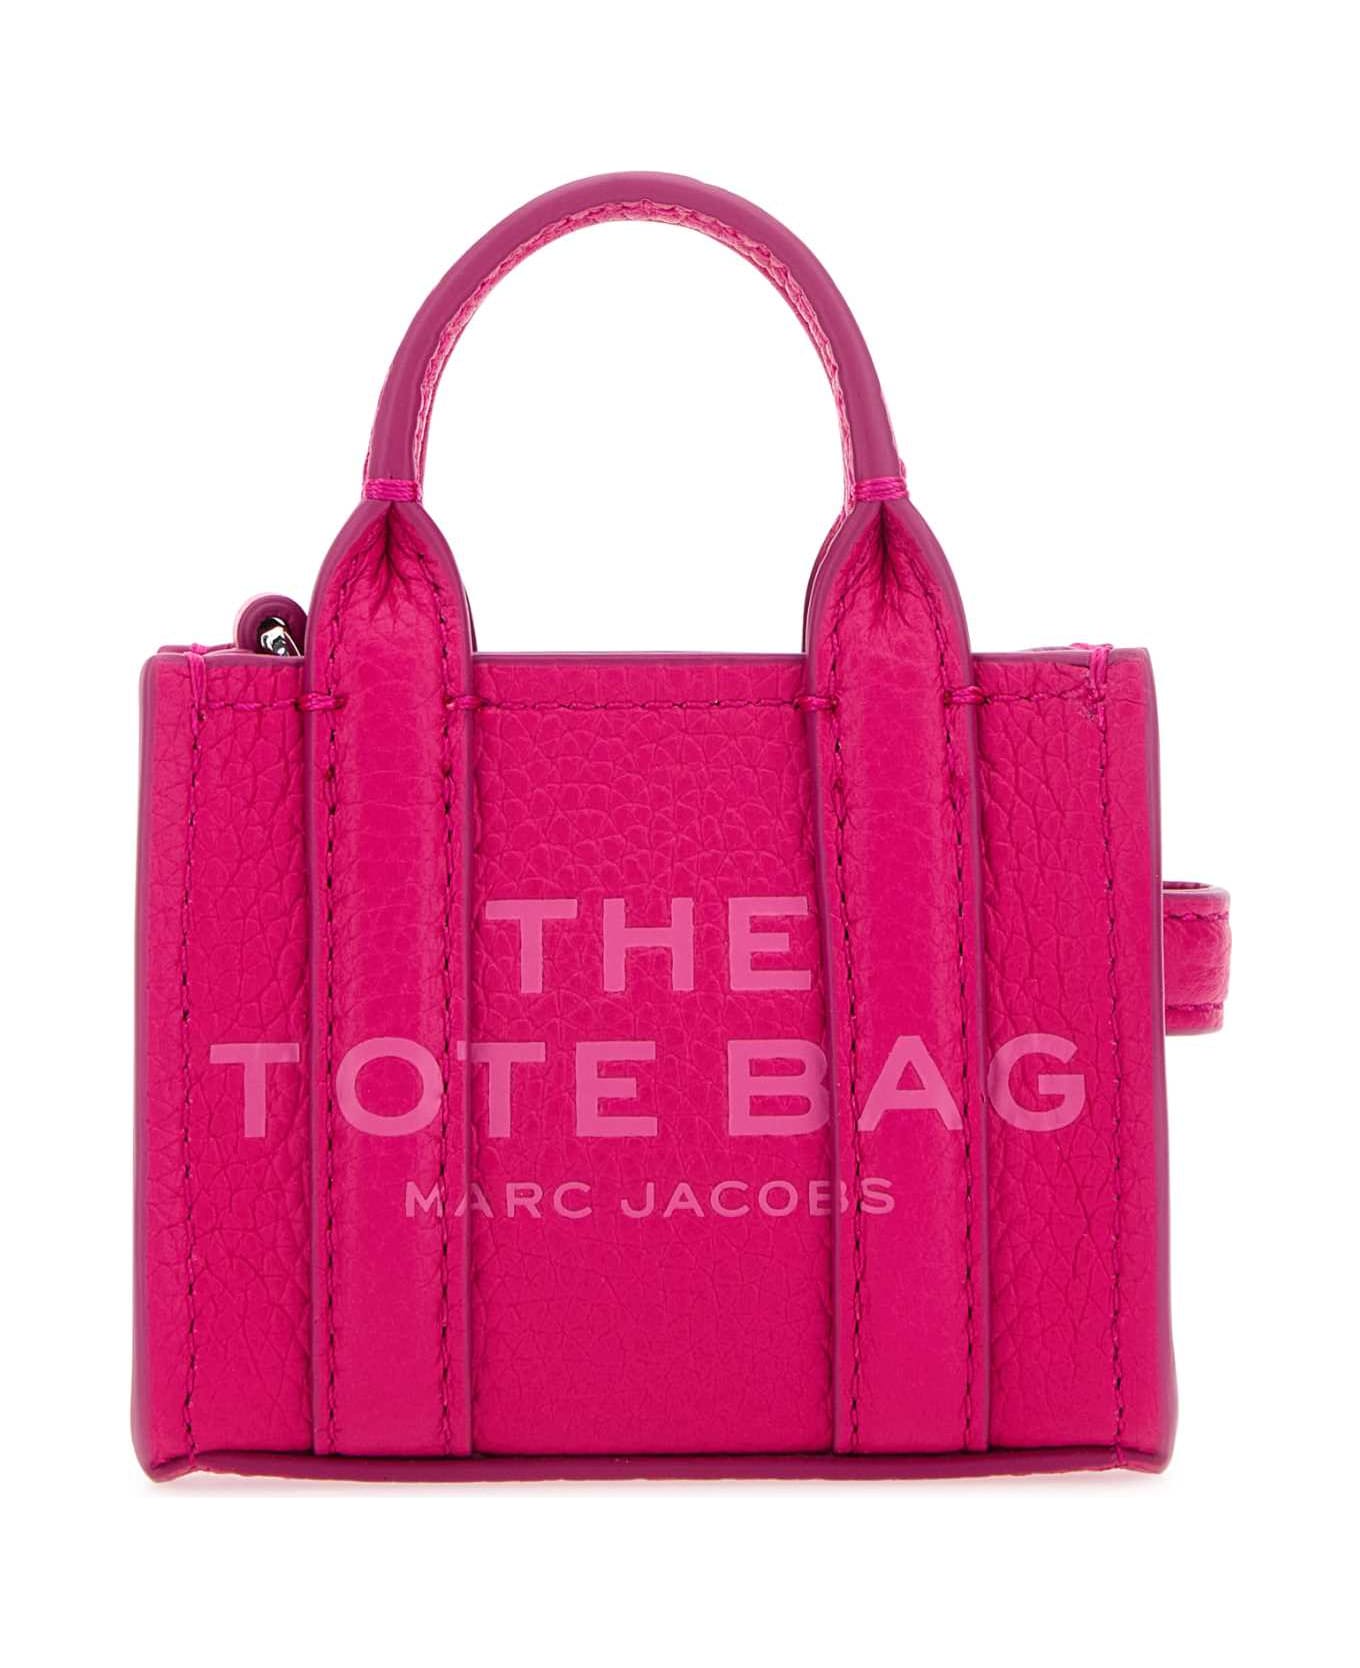 Marc Jacobs Fuchsia Leather Nano Tote Bag Charm - HOTPINK トートバッグ